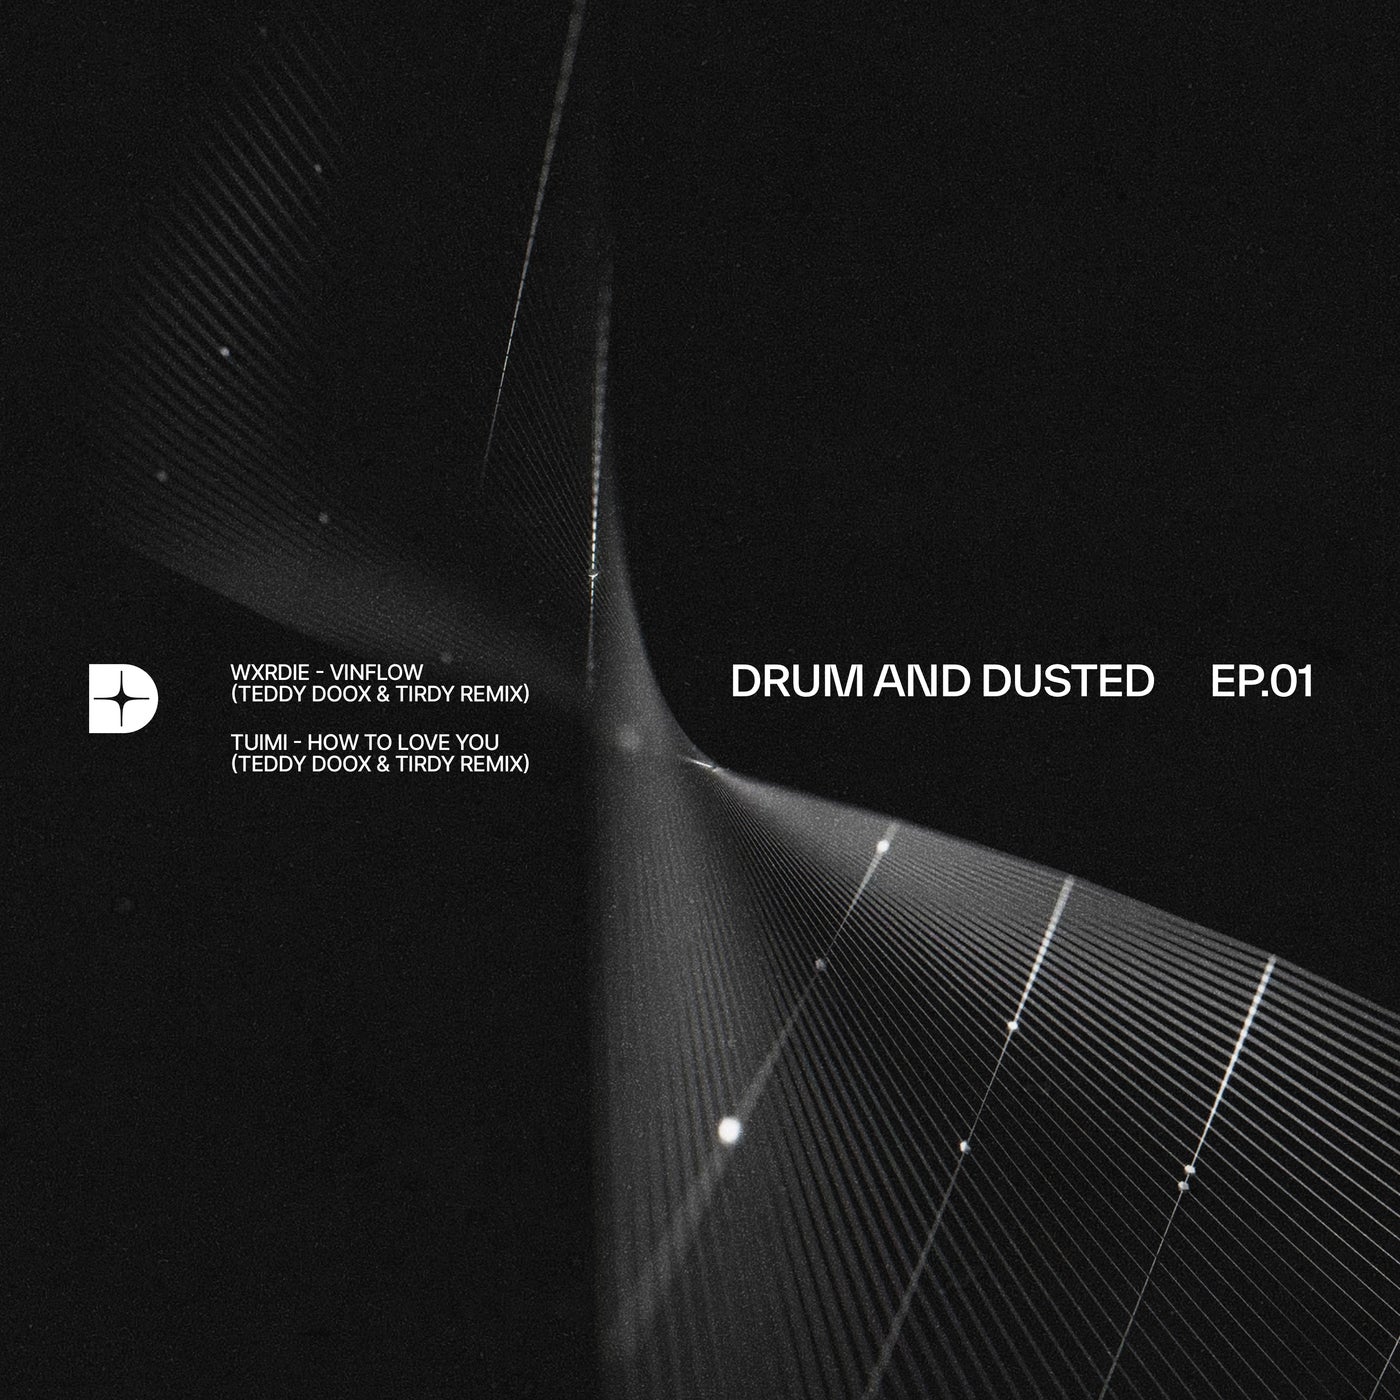 Drum And Dusted EP.01